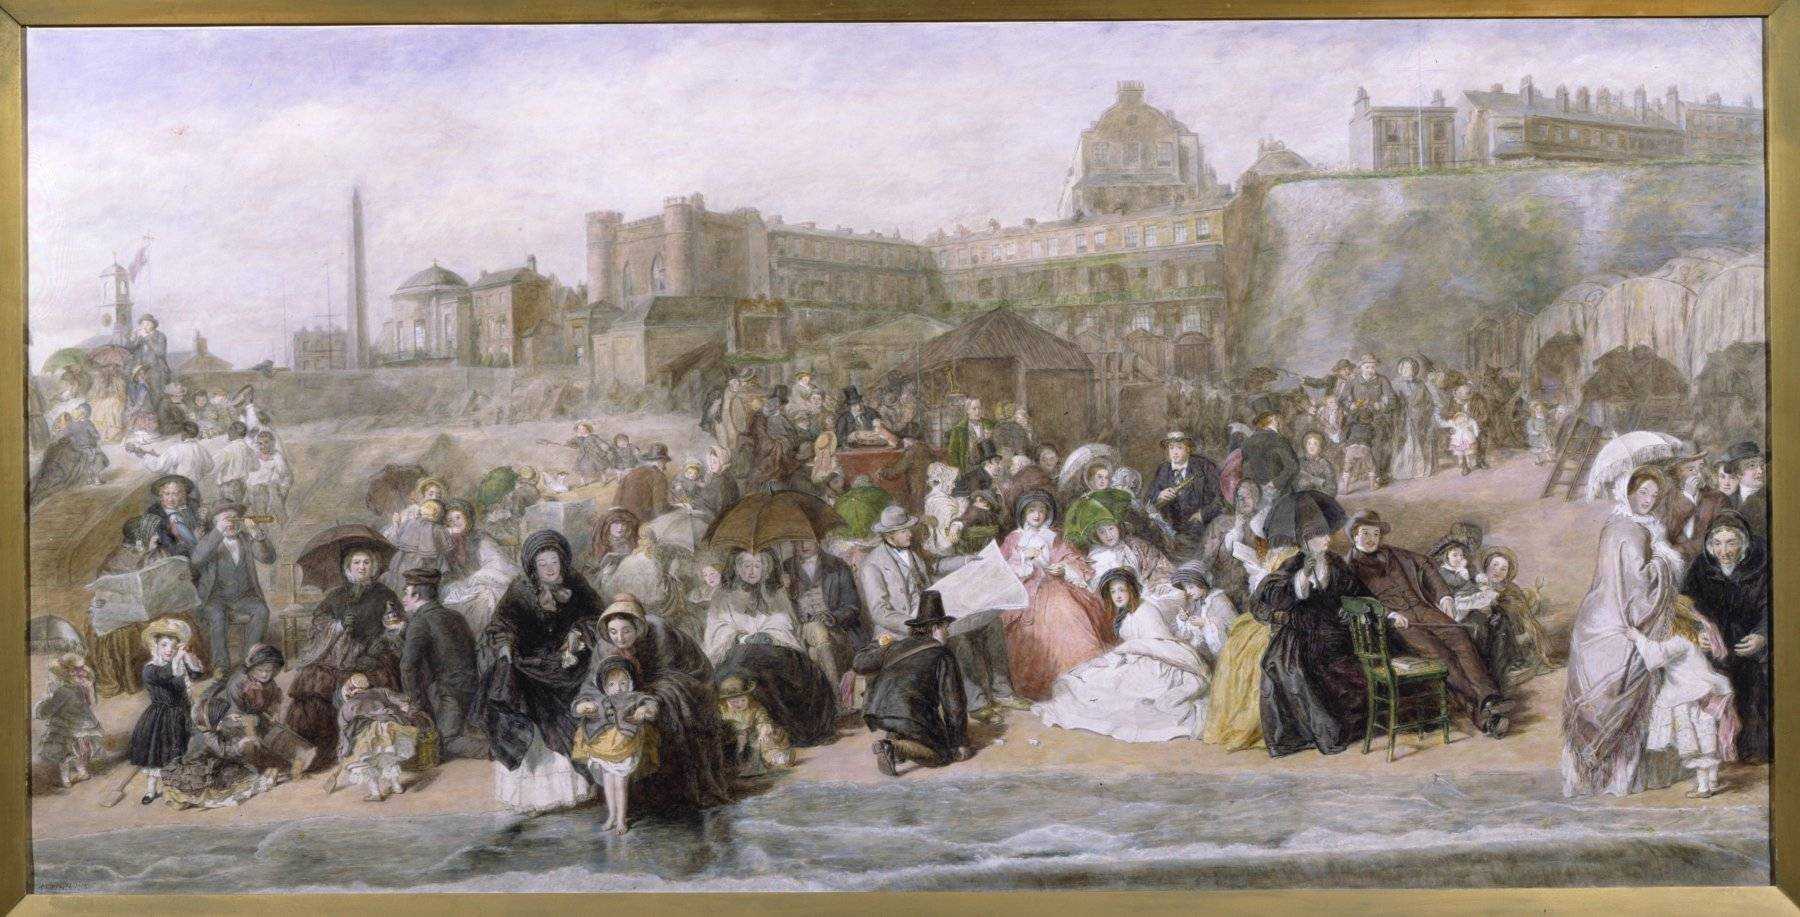 Ramsgate Sands (where Thomas Bearman and Catherine Boyd married in 1845) painted by William Frith around 1852, bought by Queen Victoria in 1854. 